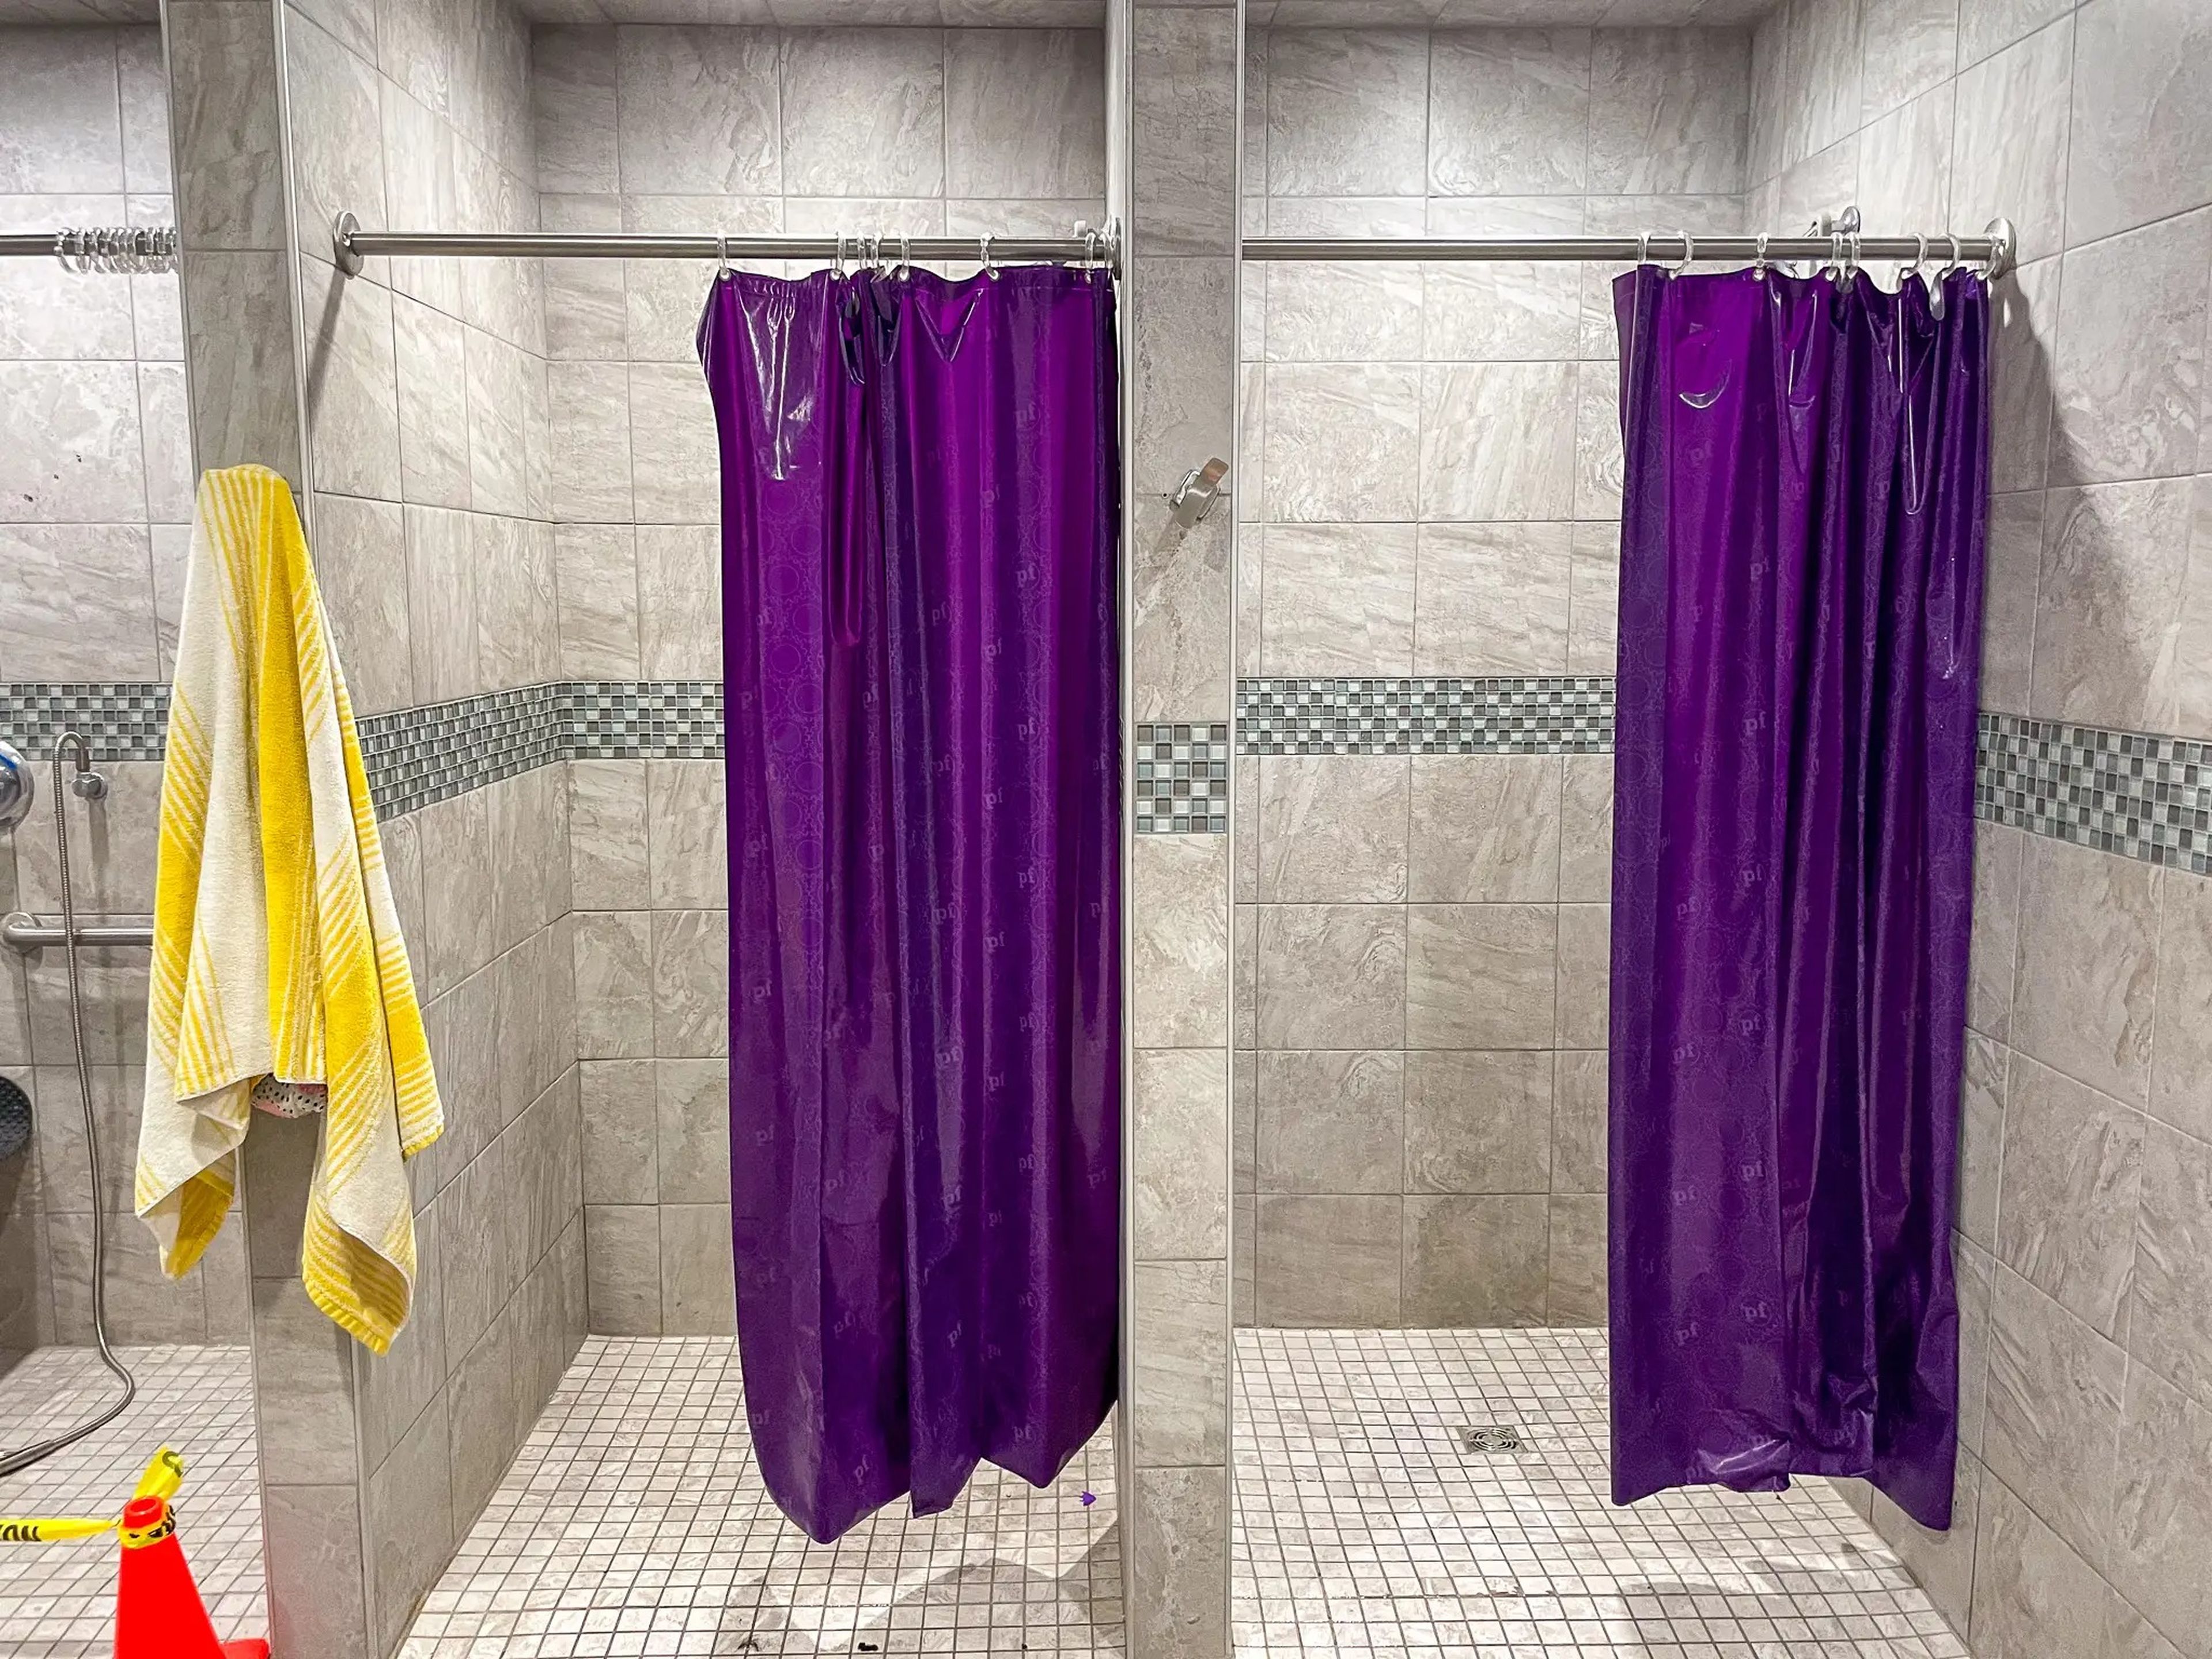 Showers at Planet Fitness.